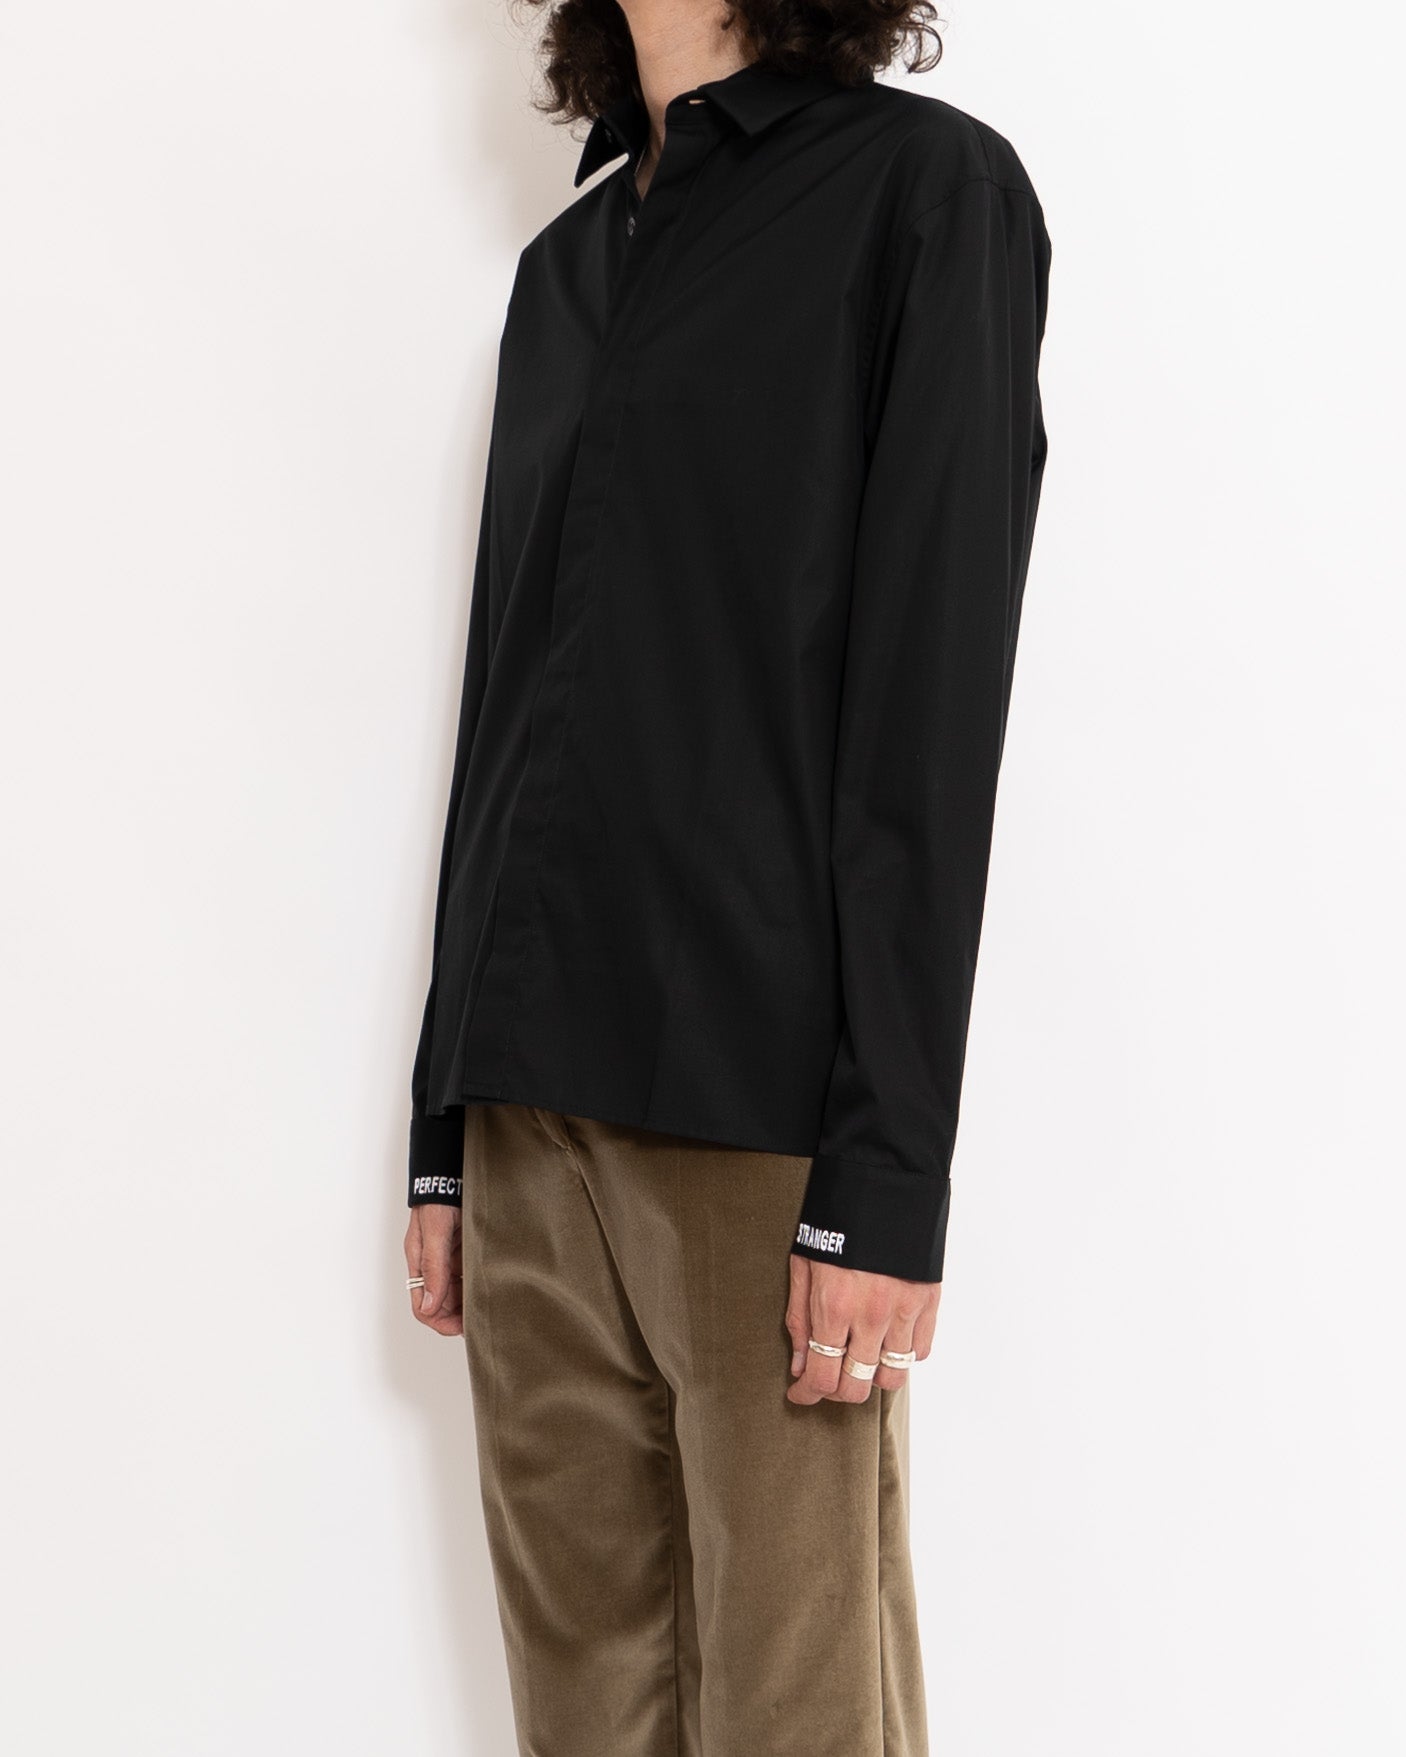 FW20 Baron Black Shirt with Embroidered Cuffs Sample